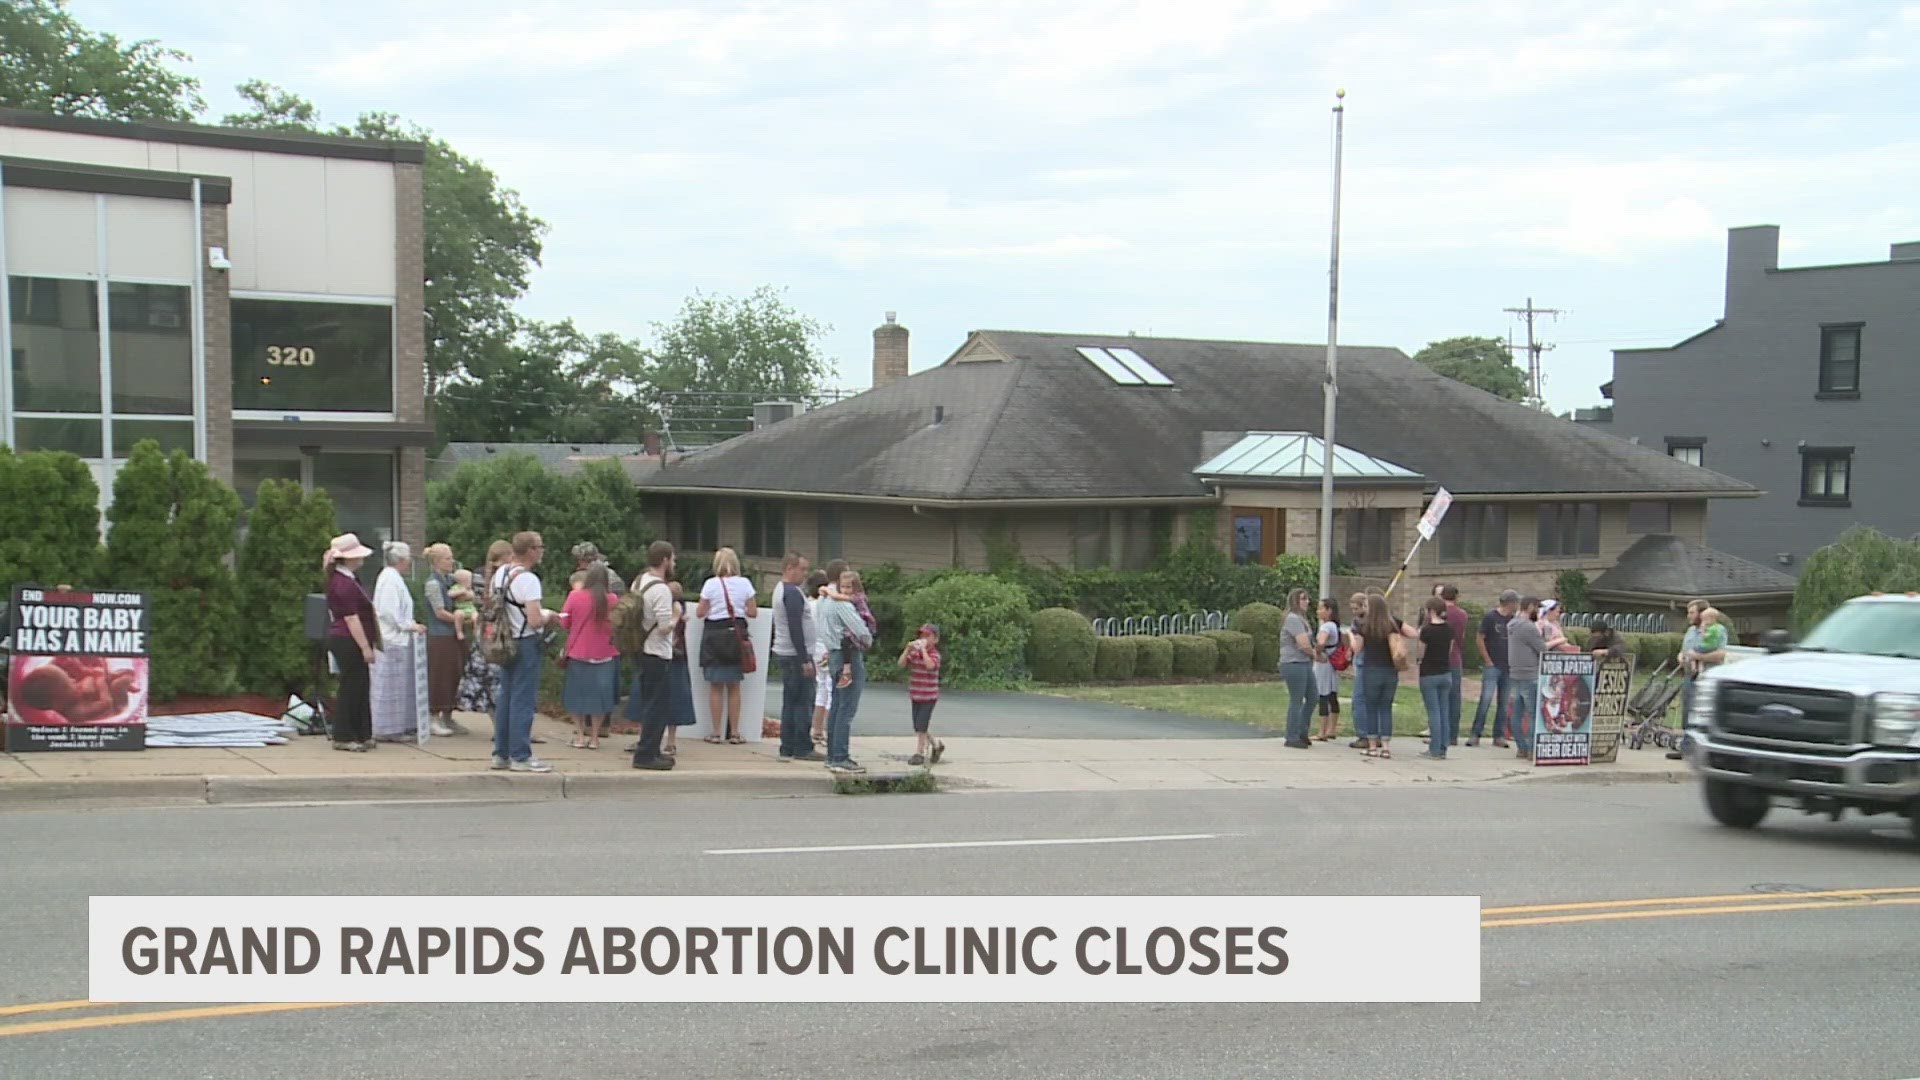 Those concerned feel this may mean less care for those who need it, as the only other procedural abortion clinic is in Kalamazoo.